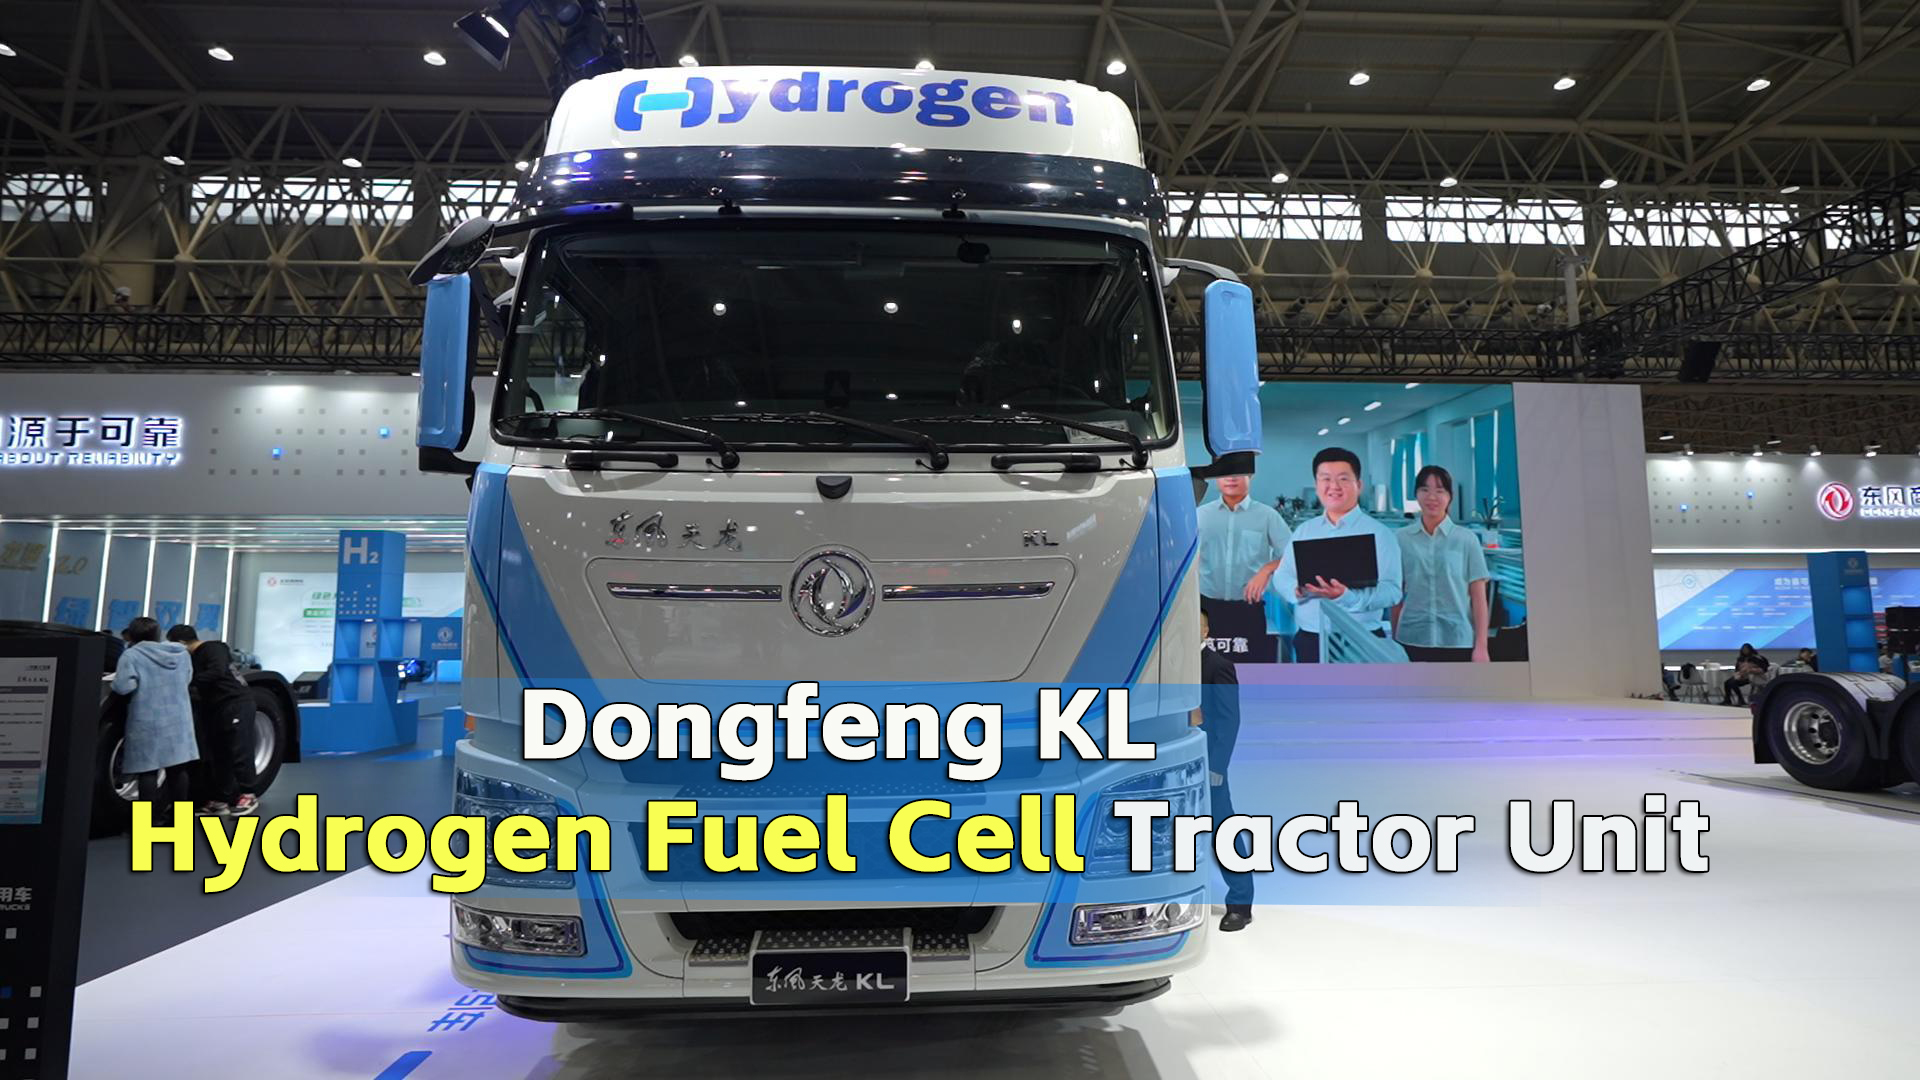 Dongfeng KL Hydrogen Fuel Cell Tractor Unit